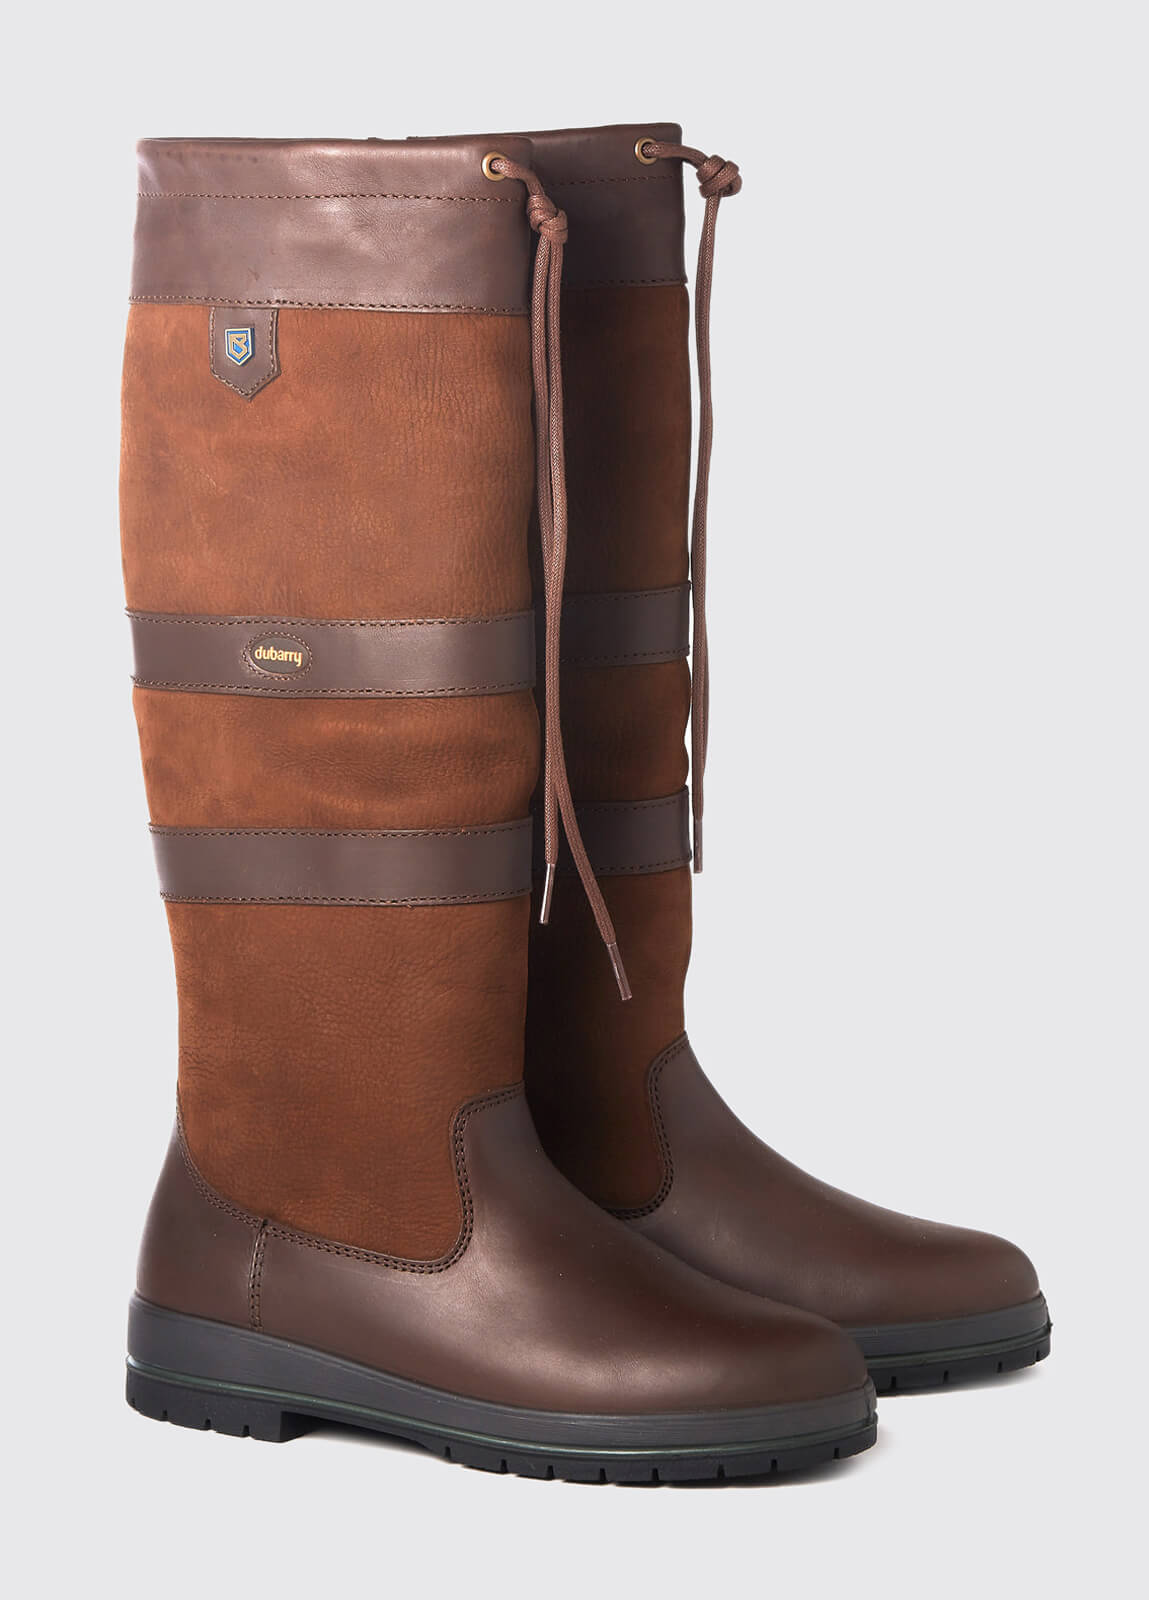 Dubarry Womens Galway Slimfit Country Boot - Walnut